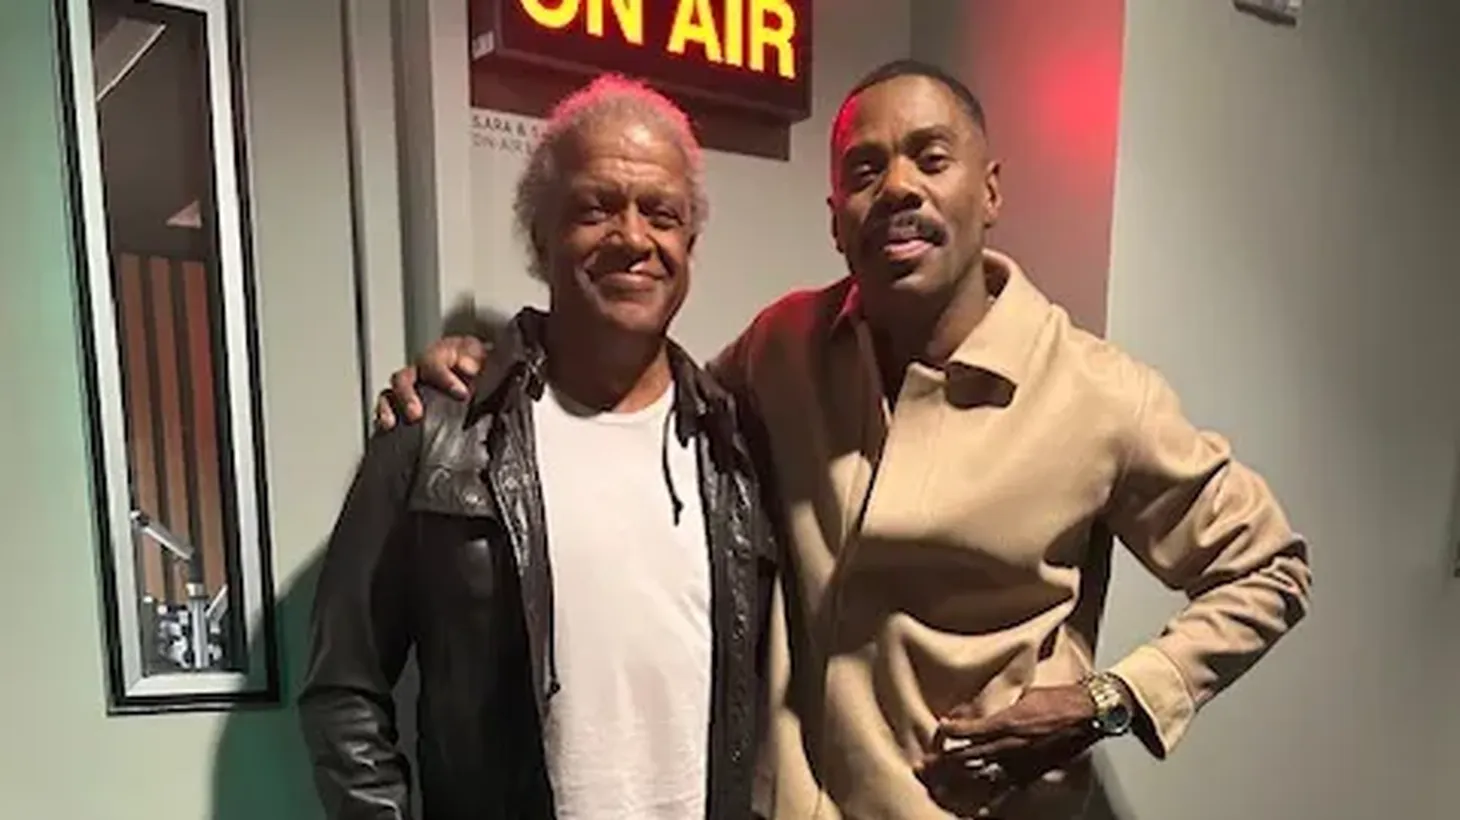 Elvis Mitchell and Colman Domingo at KCRW HQ.